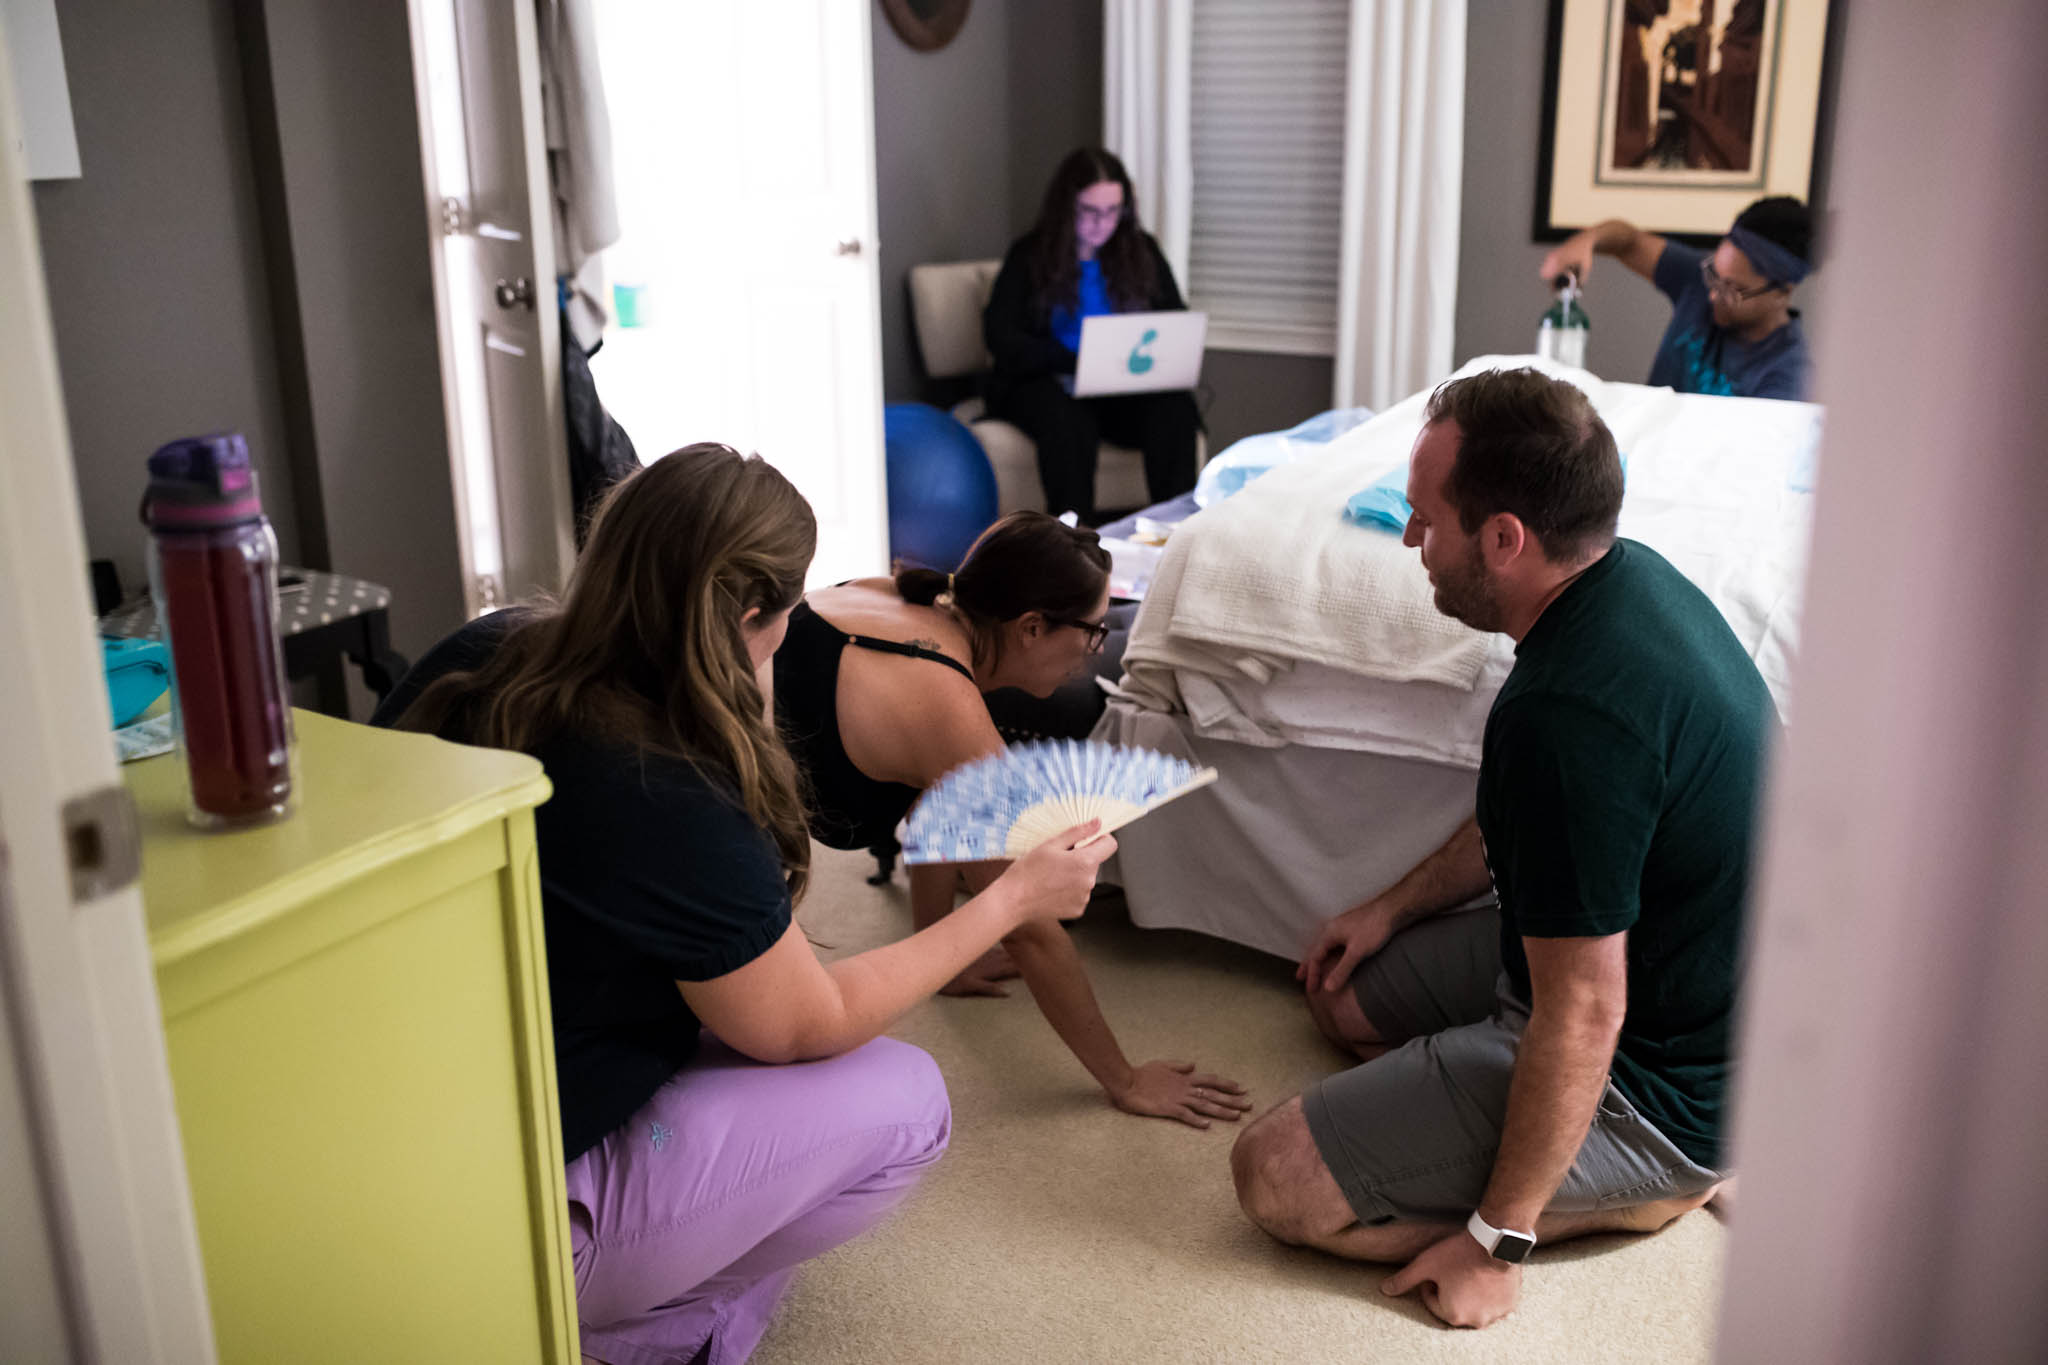 Lawren Rose Photography a DFW Birth Photographer takes an image peeking into the bedroom during a home birth in Denton, Texas as a laboring mom and the birth team are there watching and supporting her